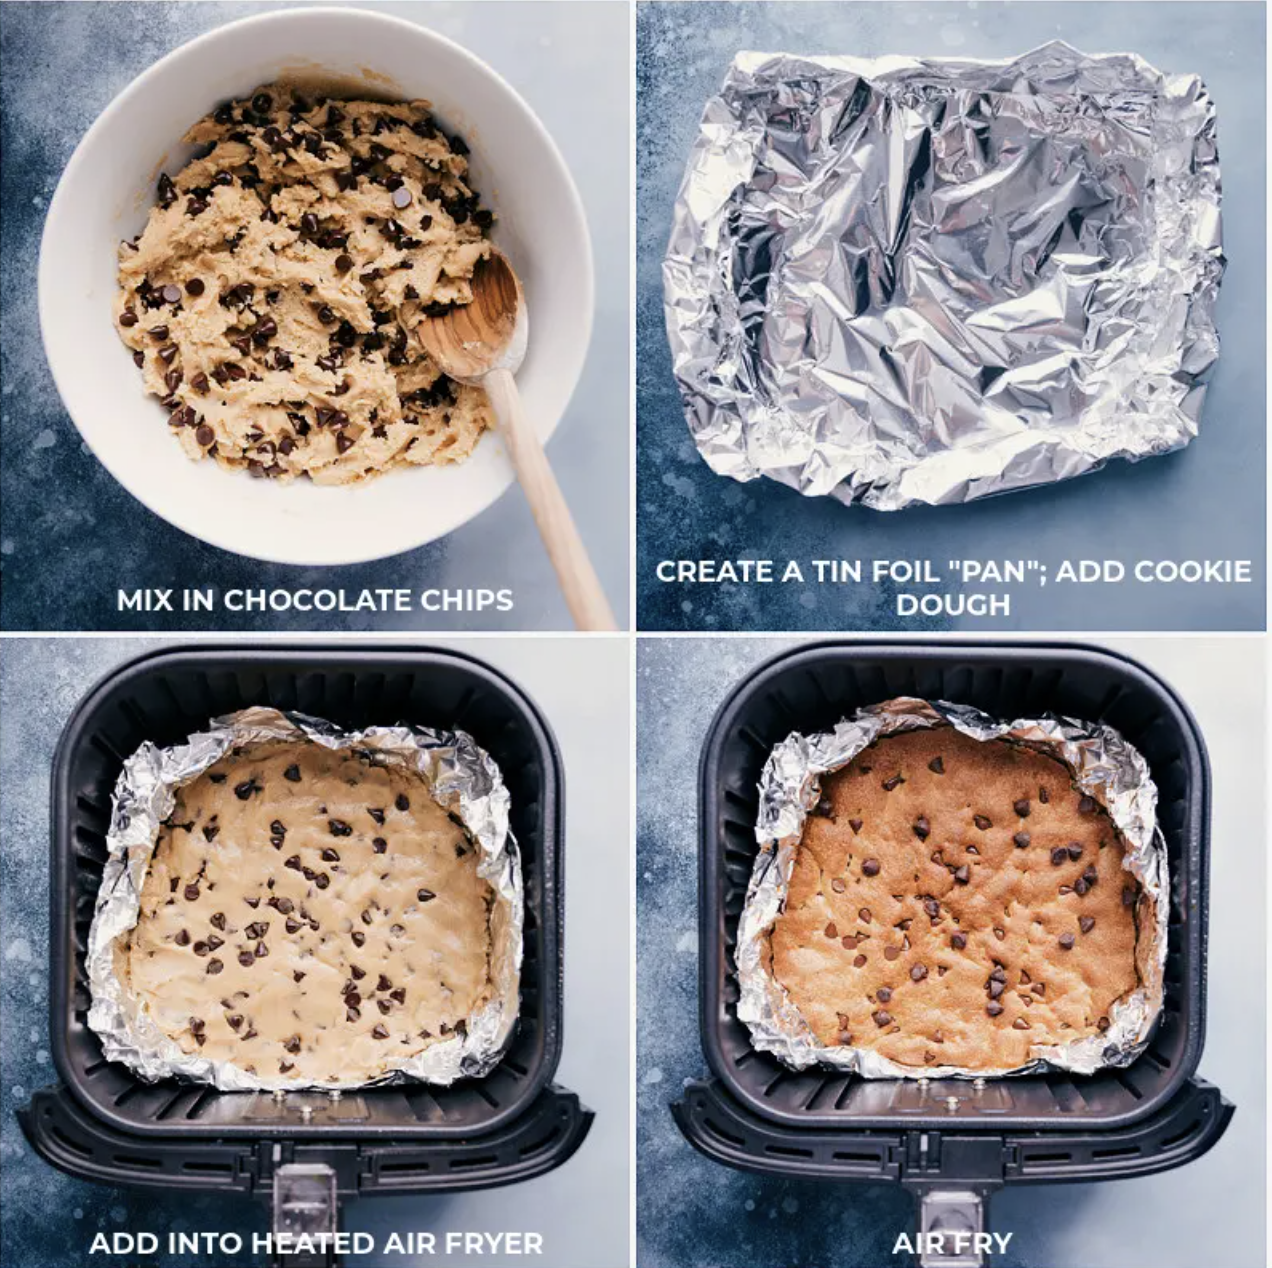 Step-by-step images showing how to make air fryer cookies, including mixing dough, creating a foil pan, and baking